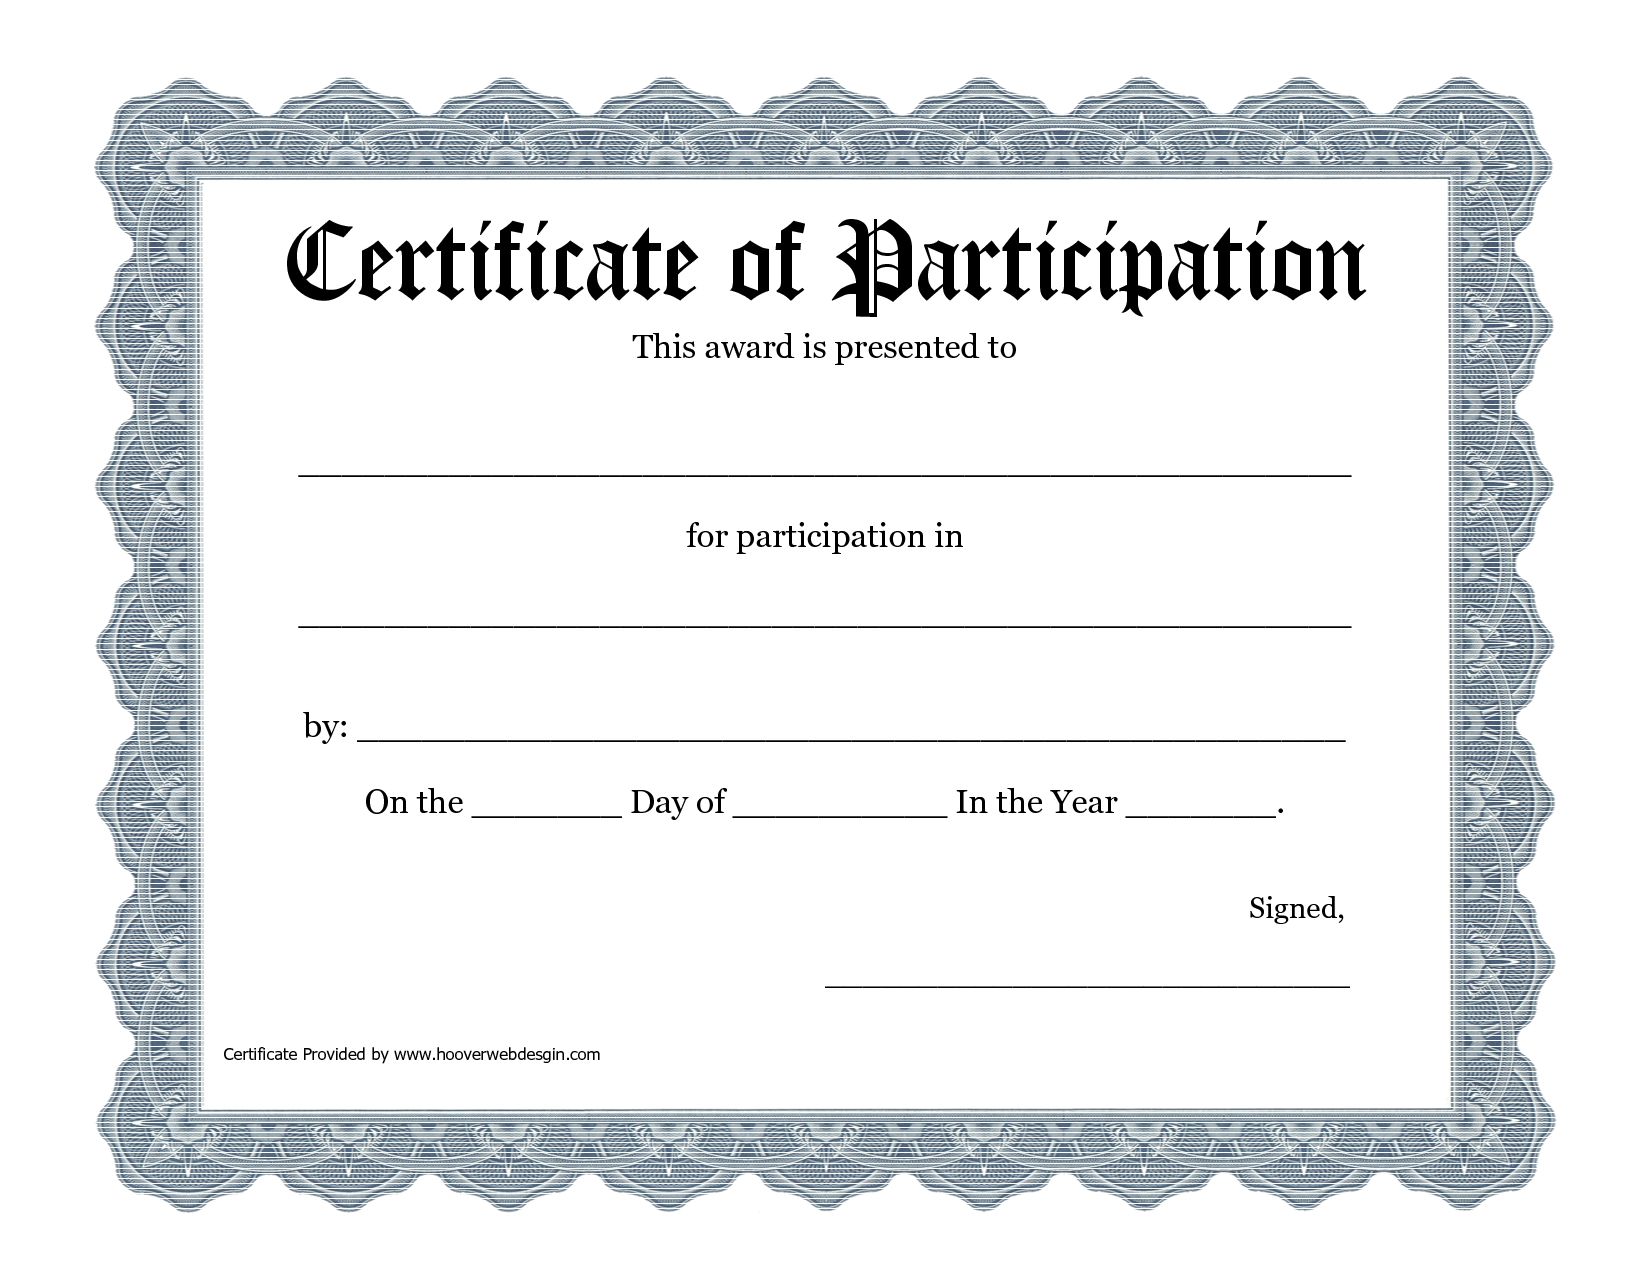 Award Certificate Template Free Excellent Ideas Download Sales with Leadership Award Certificate Template